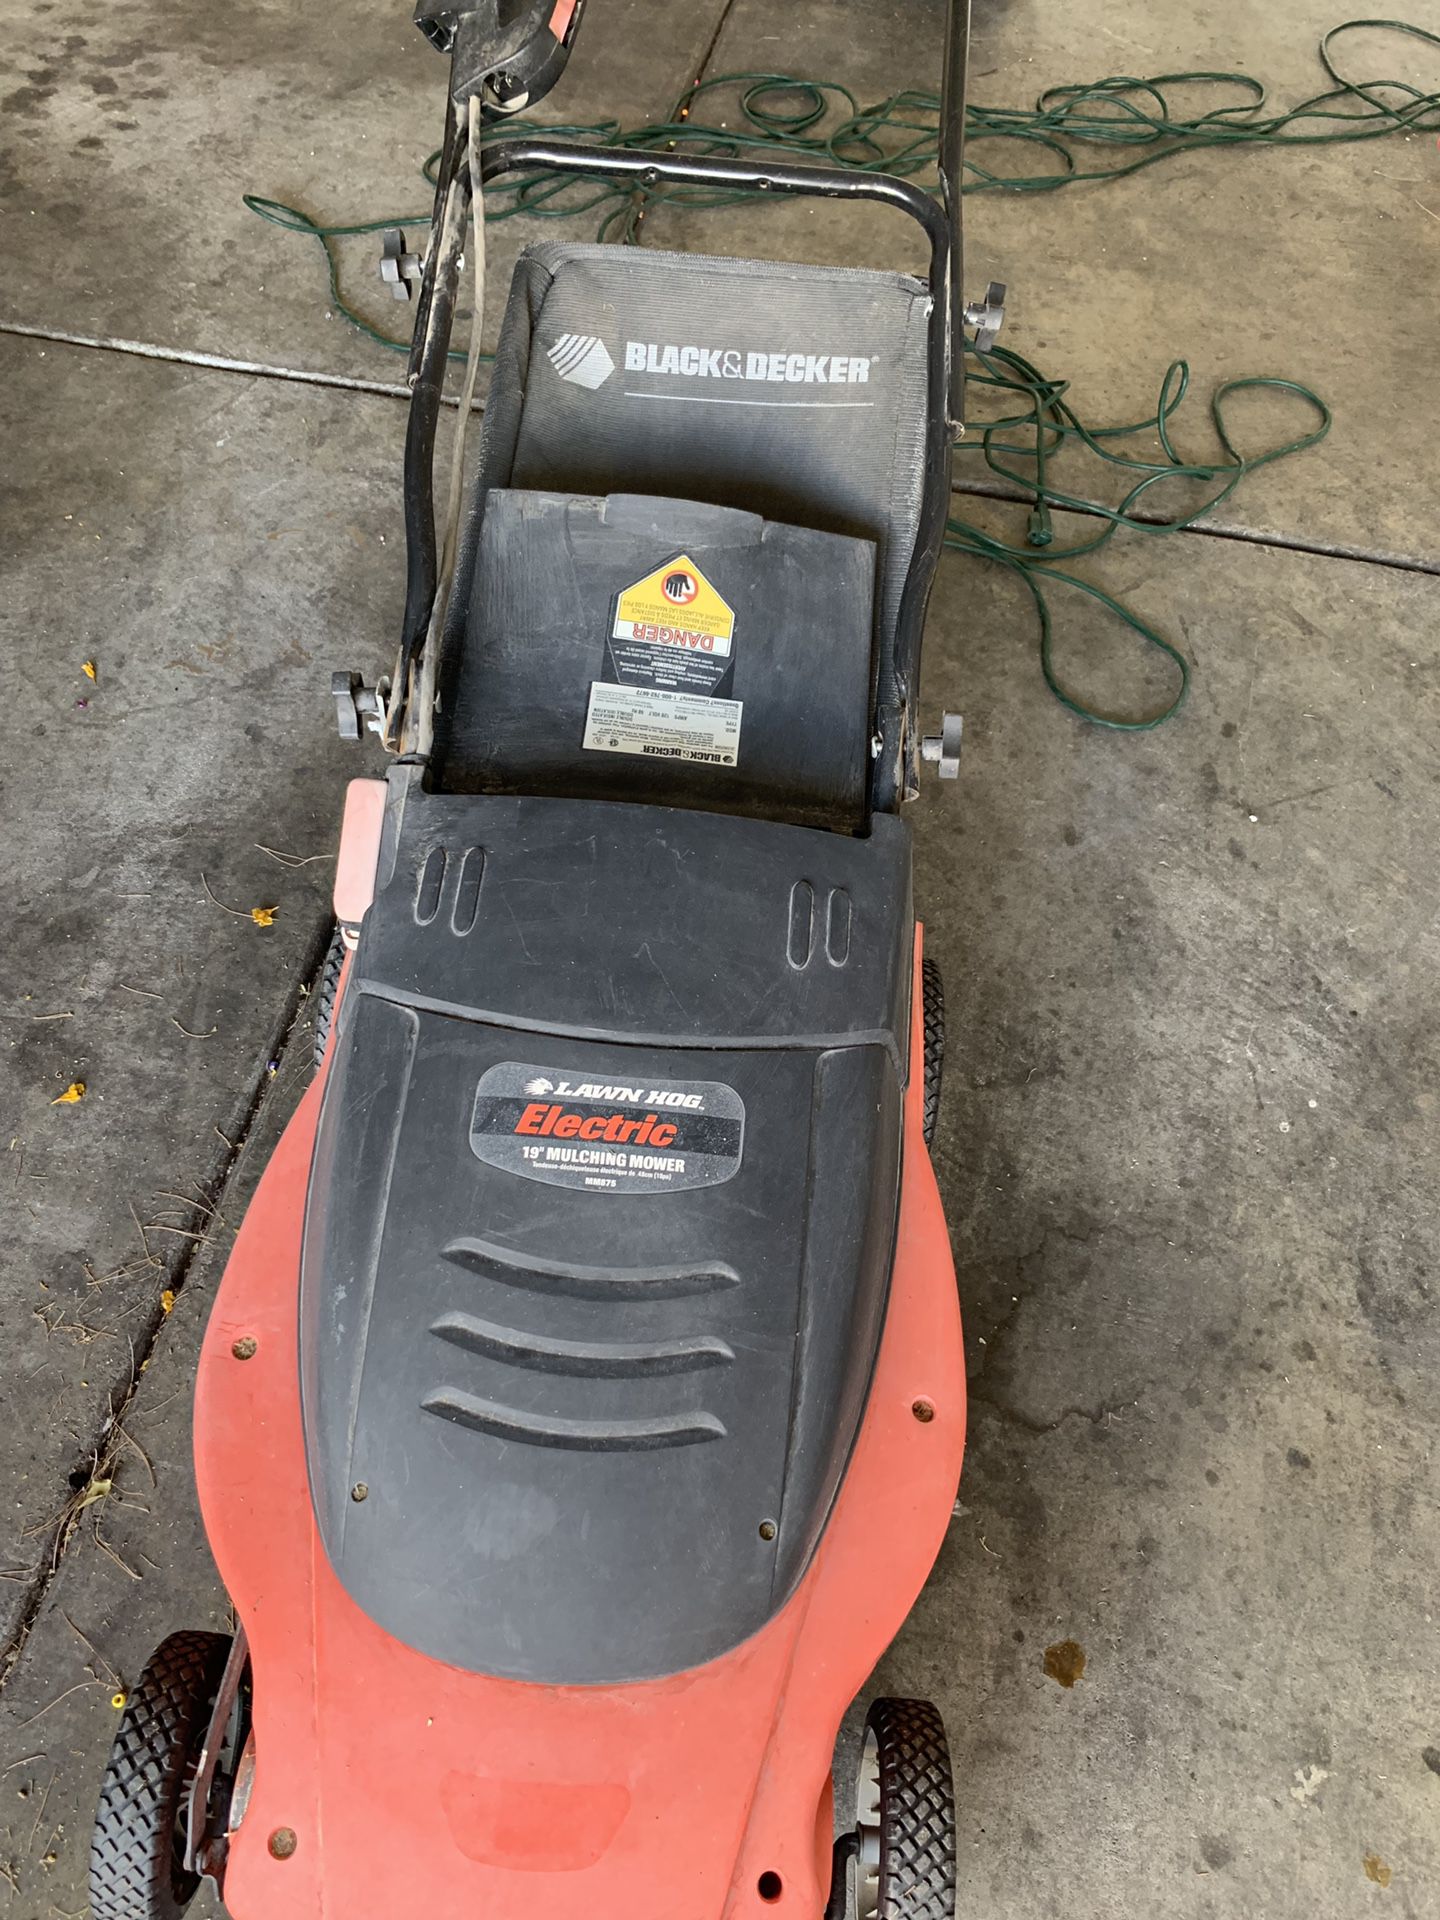 Black and decker electric lawn mower